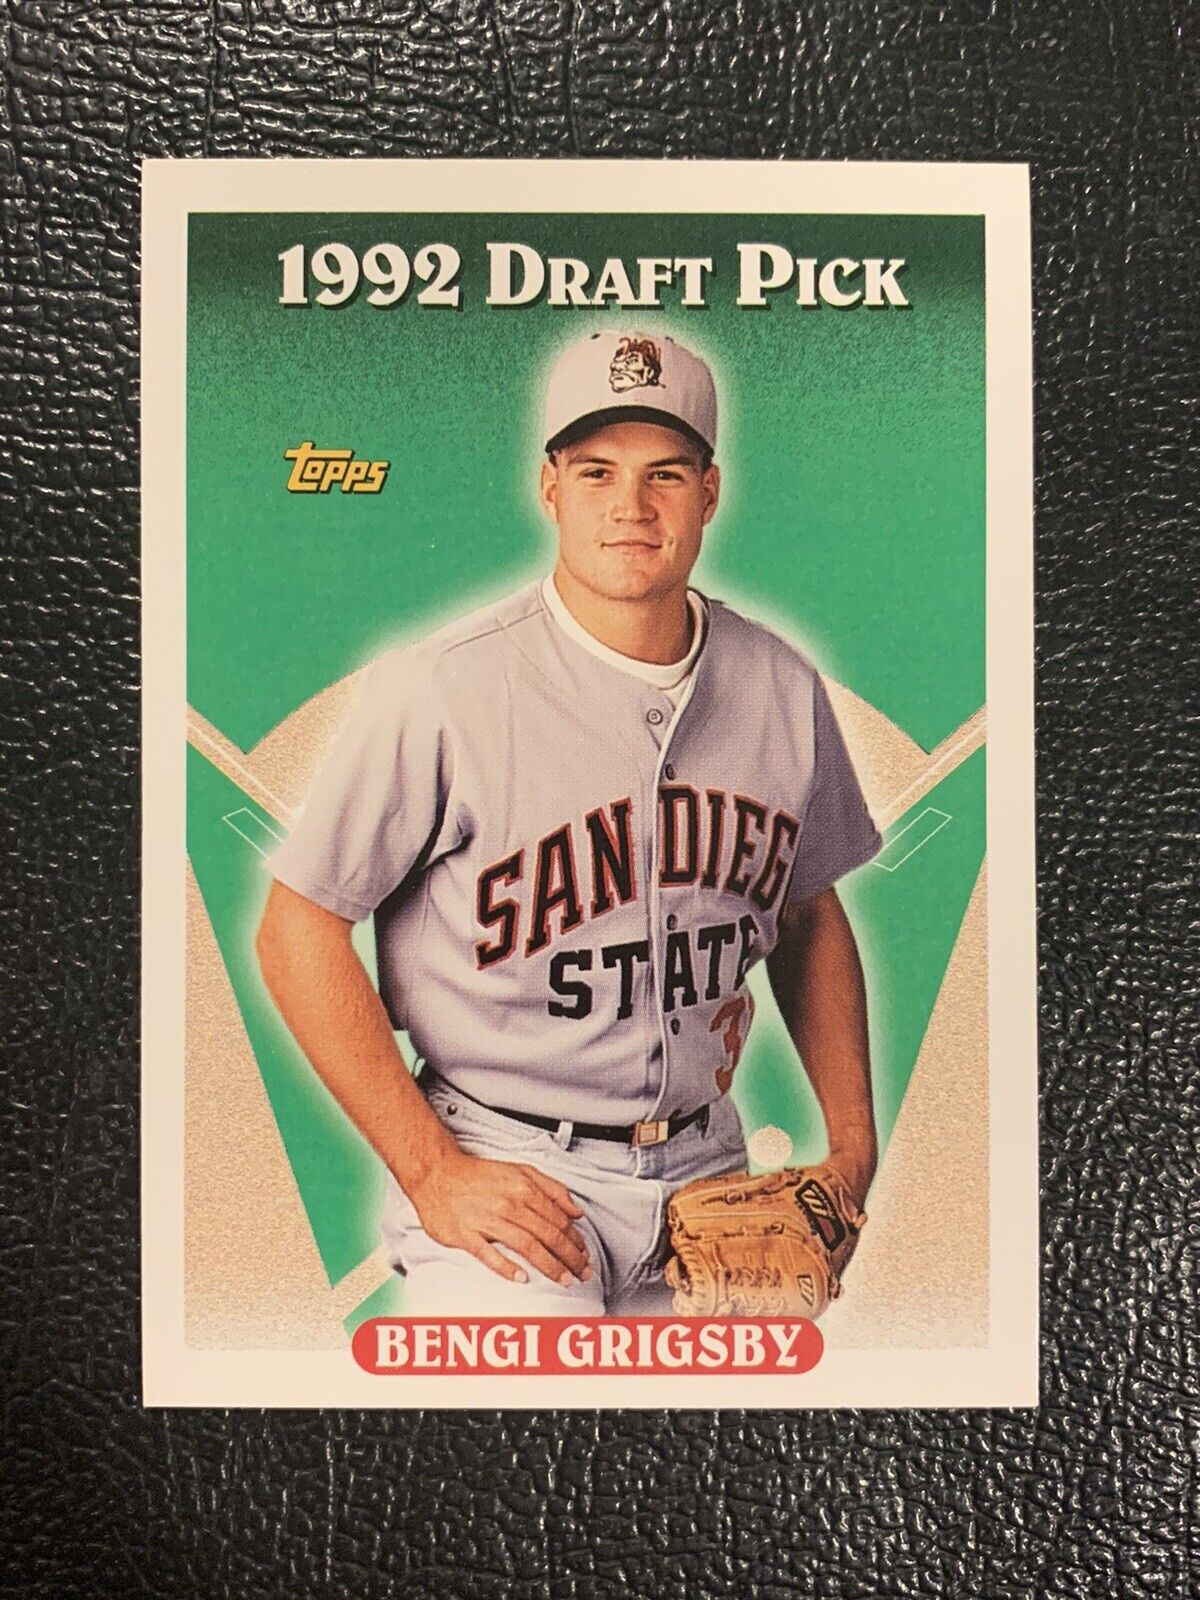 Bengi Grigsby 1993 Topps #518 1992 Draft Pick San Diego State